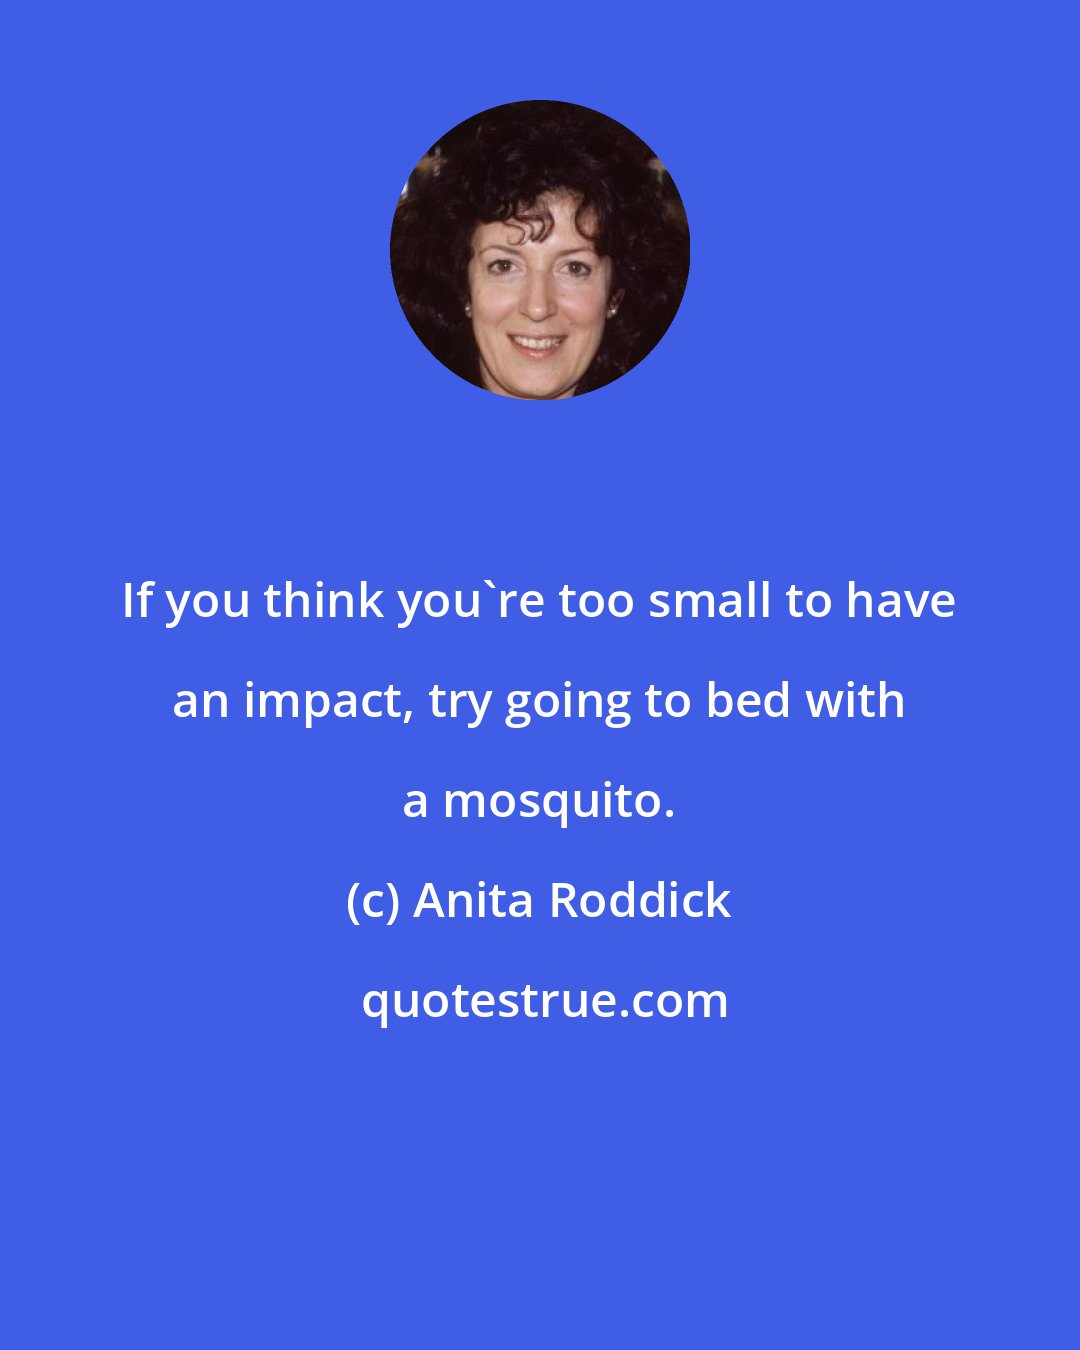 Anita Roddick: If you think you're too small to have an impact, try going to bed with a mosquito.